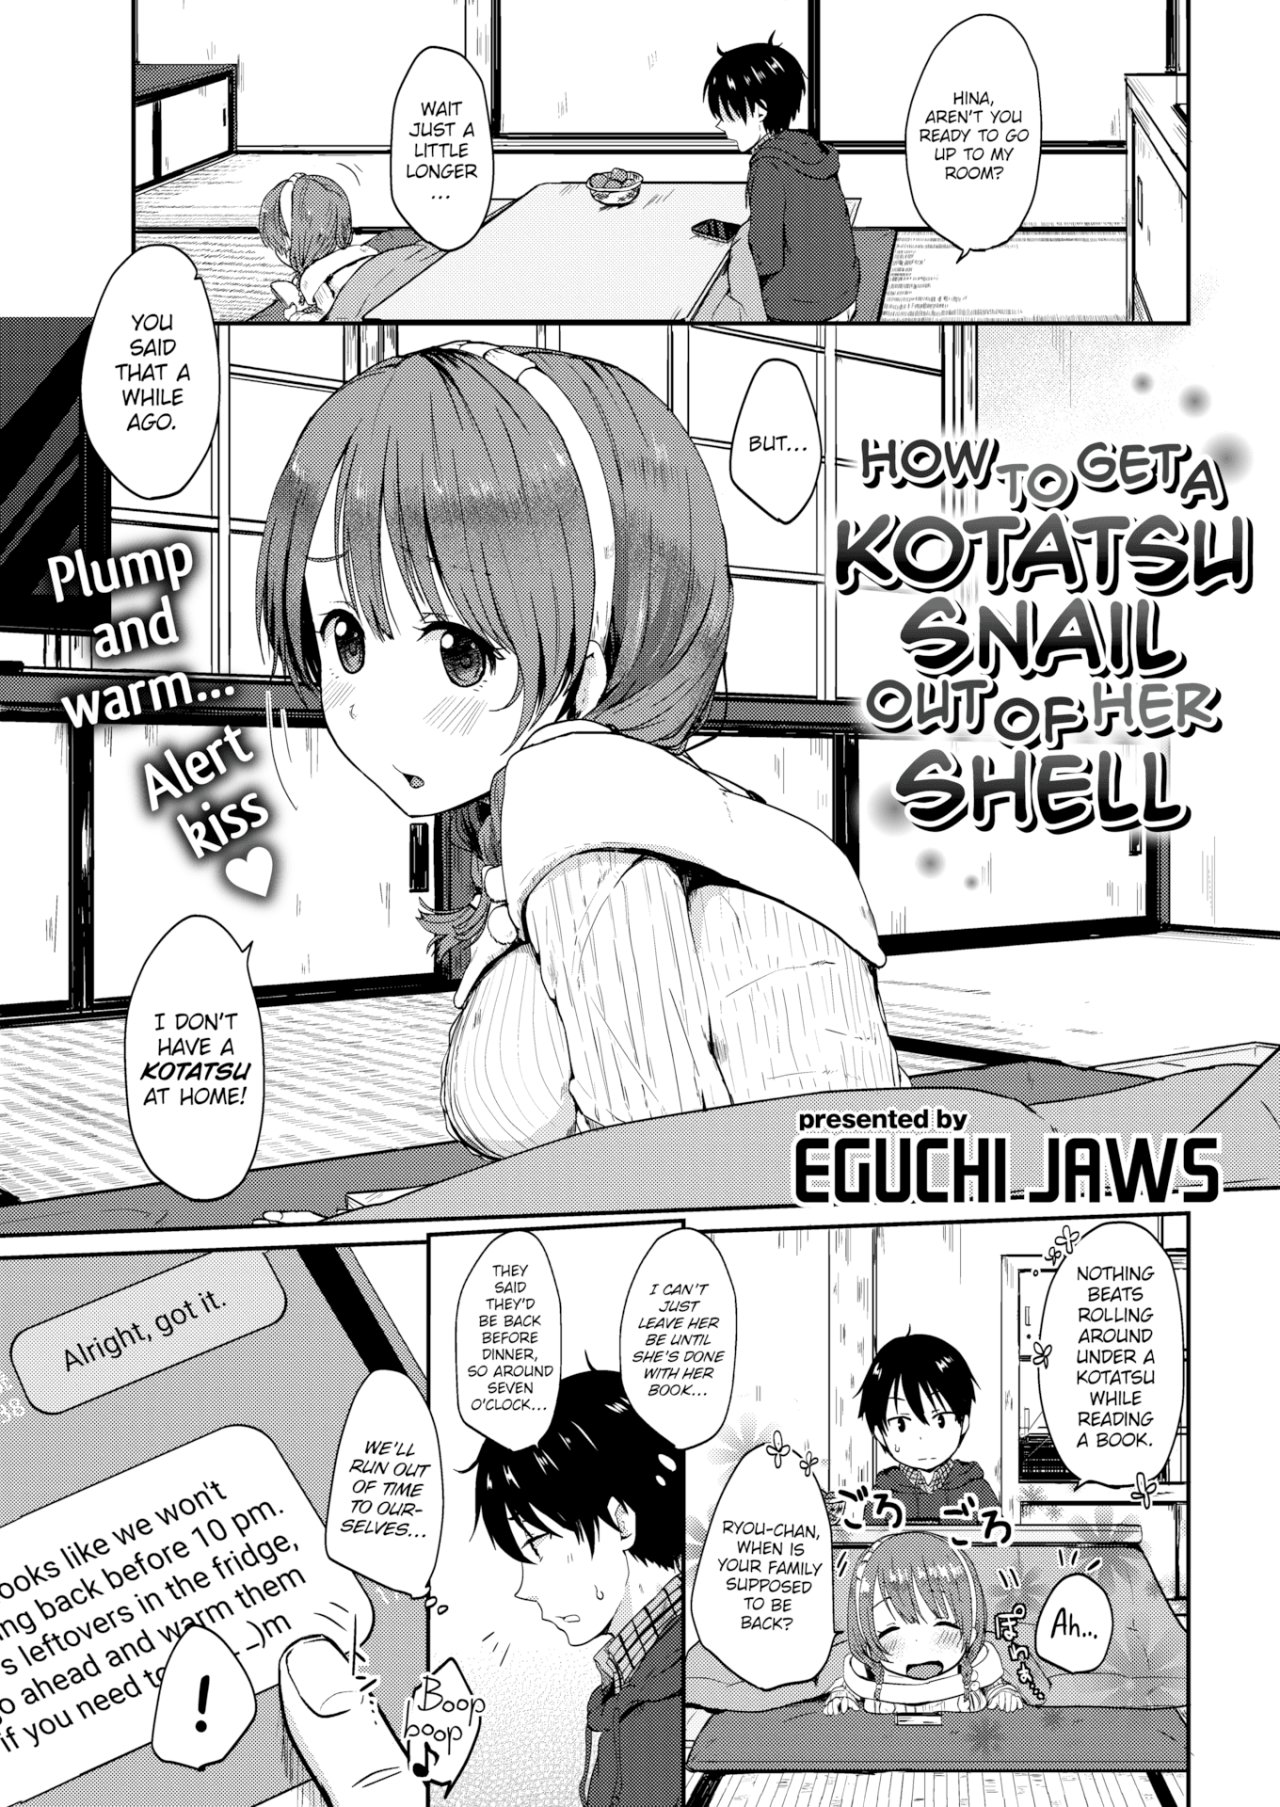 How to Get a Kotatsu Snail out of Her Shell - 0